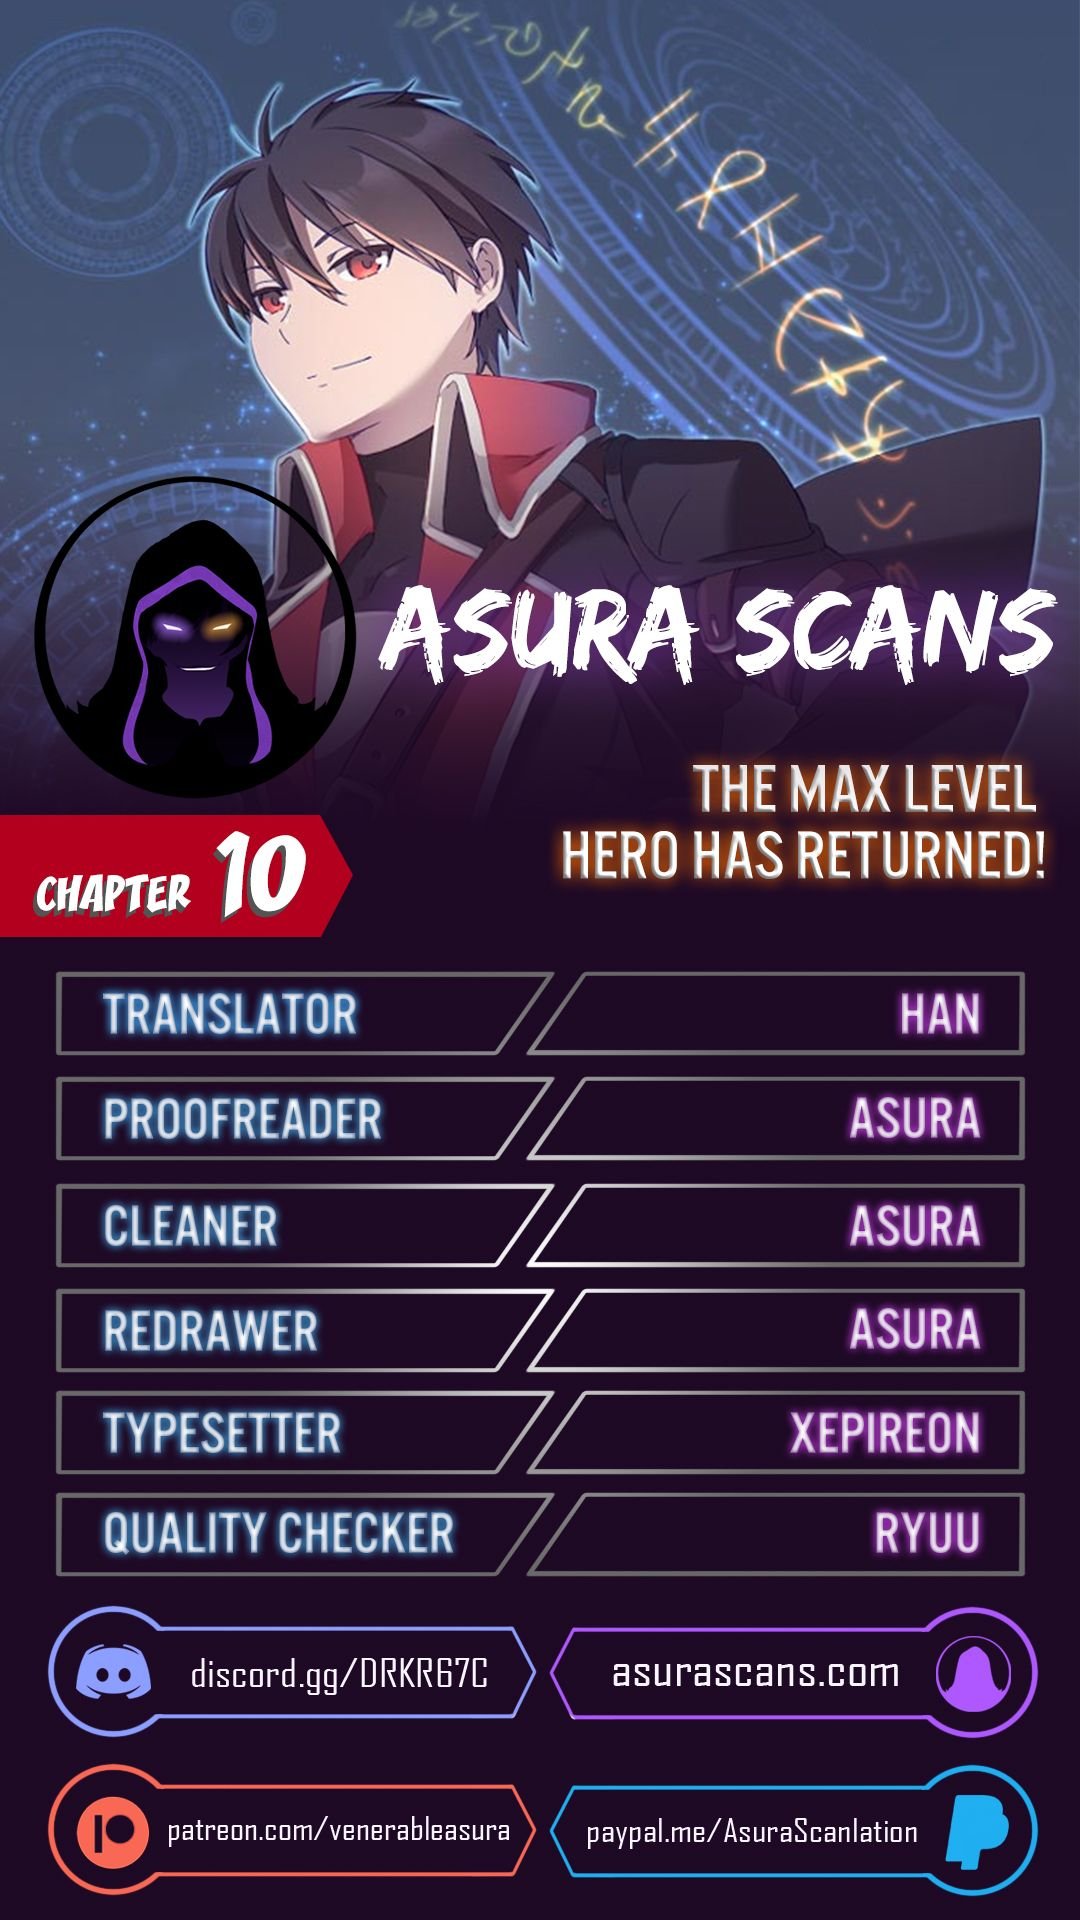 The MAX leveled hero will return! Chapter 10